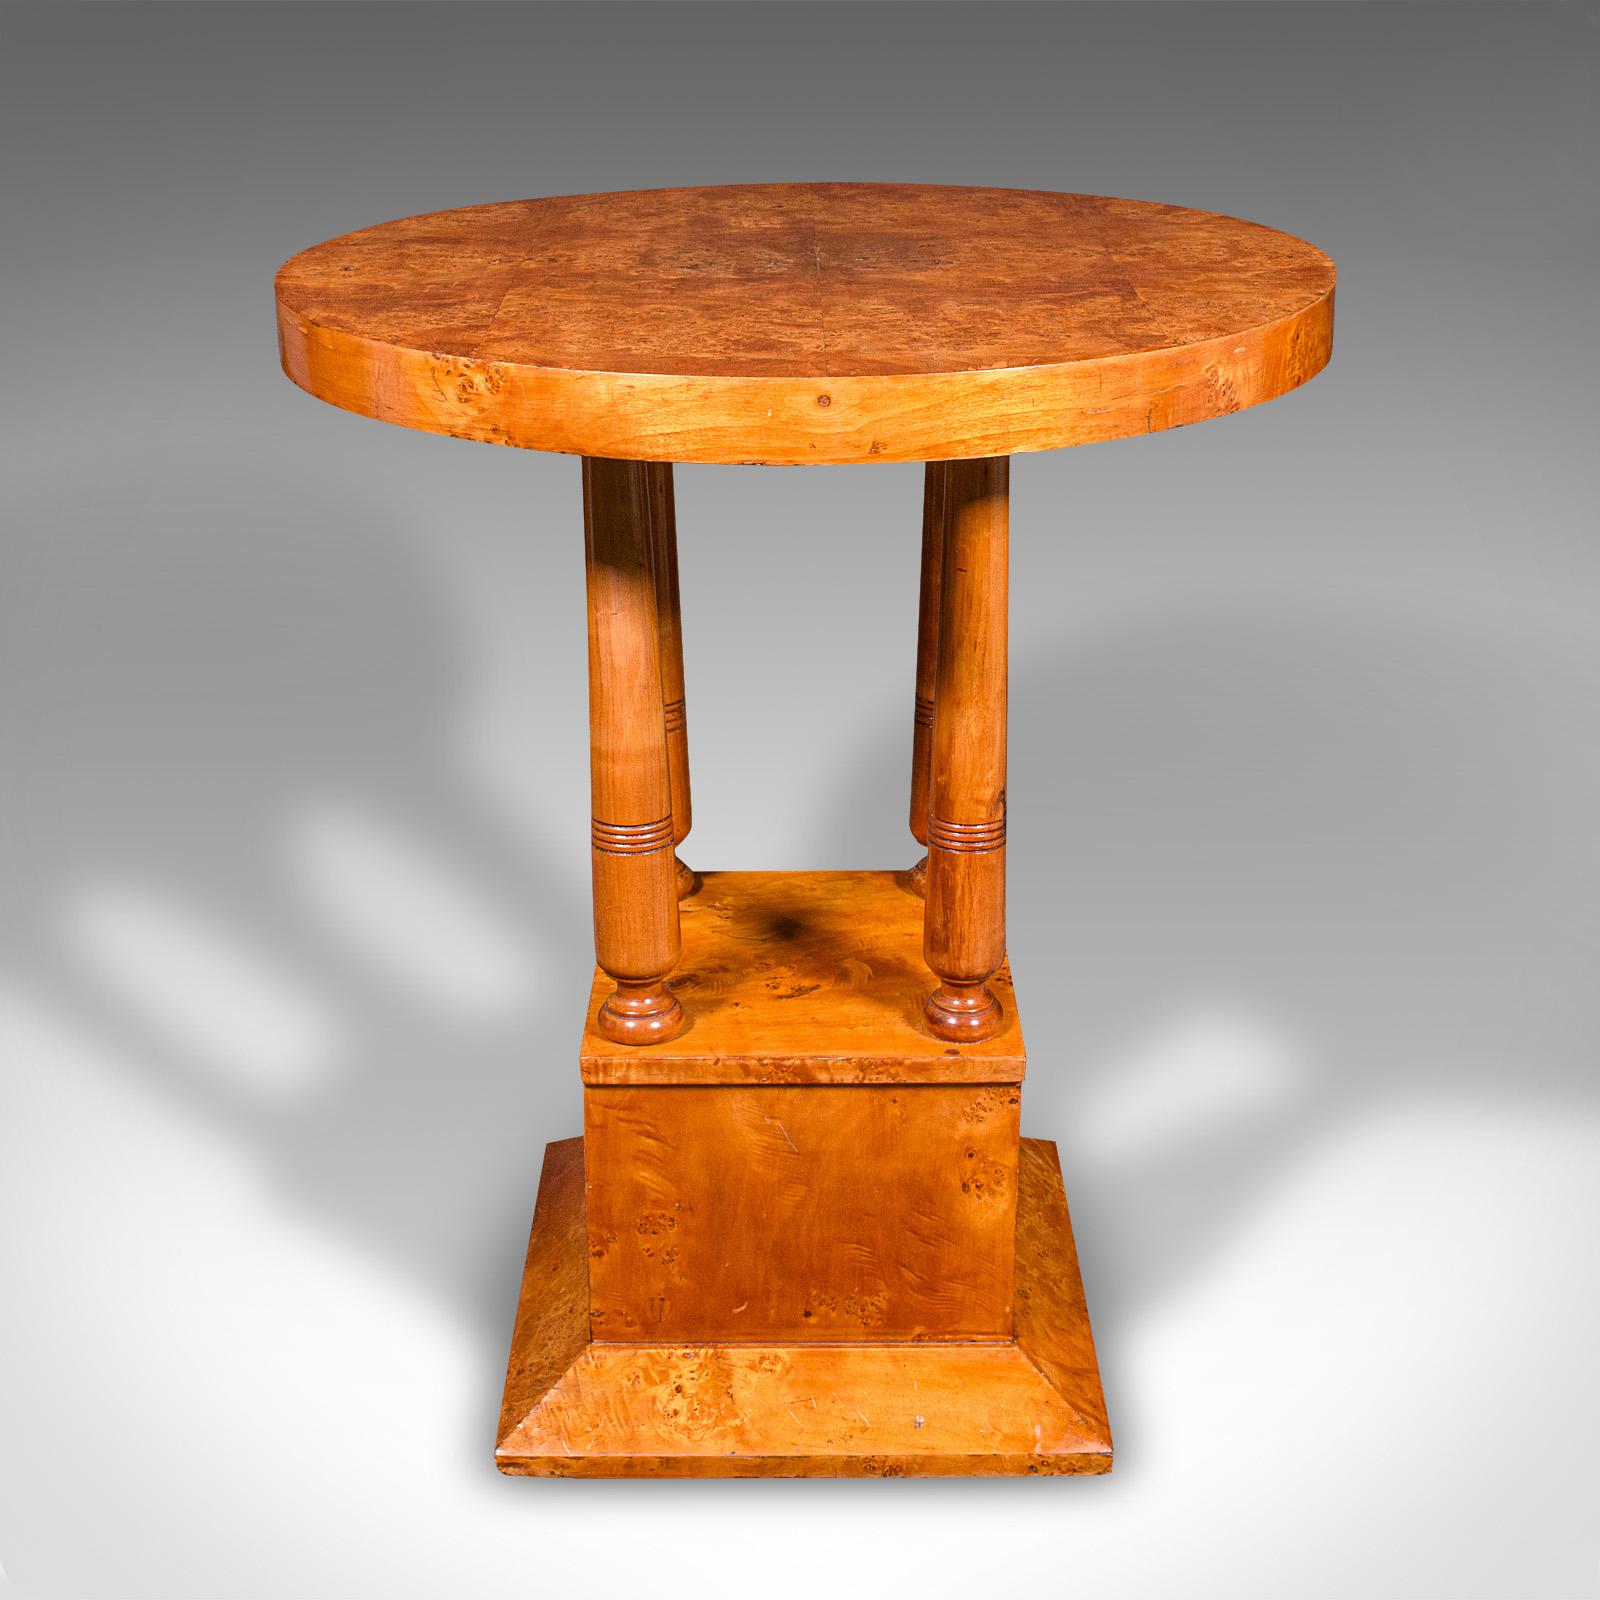 This is a vintage podium hall table. A French, bird's eye maple lamp or side table, dating to the Art Deco period, circa 1930.

Strikingly decorative circular table sure to grace any hall or room
Displays a desirable aged patina and in good order